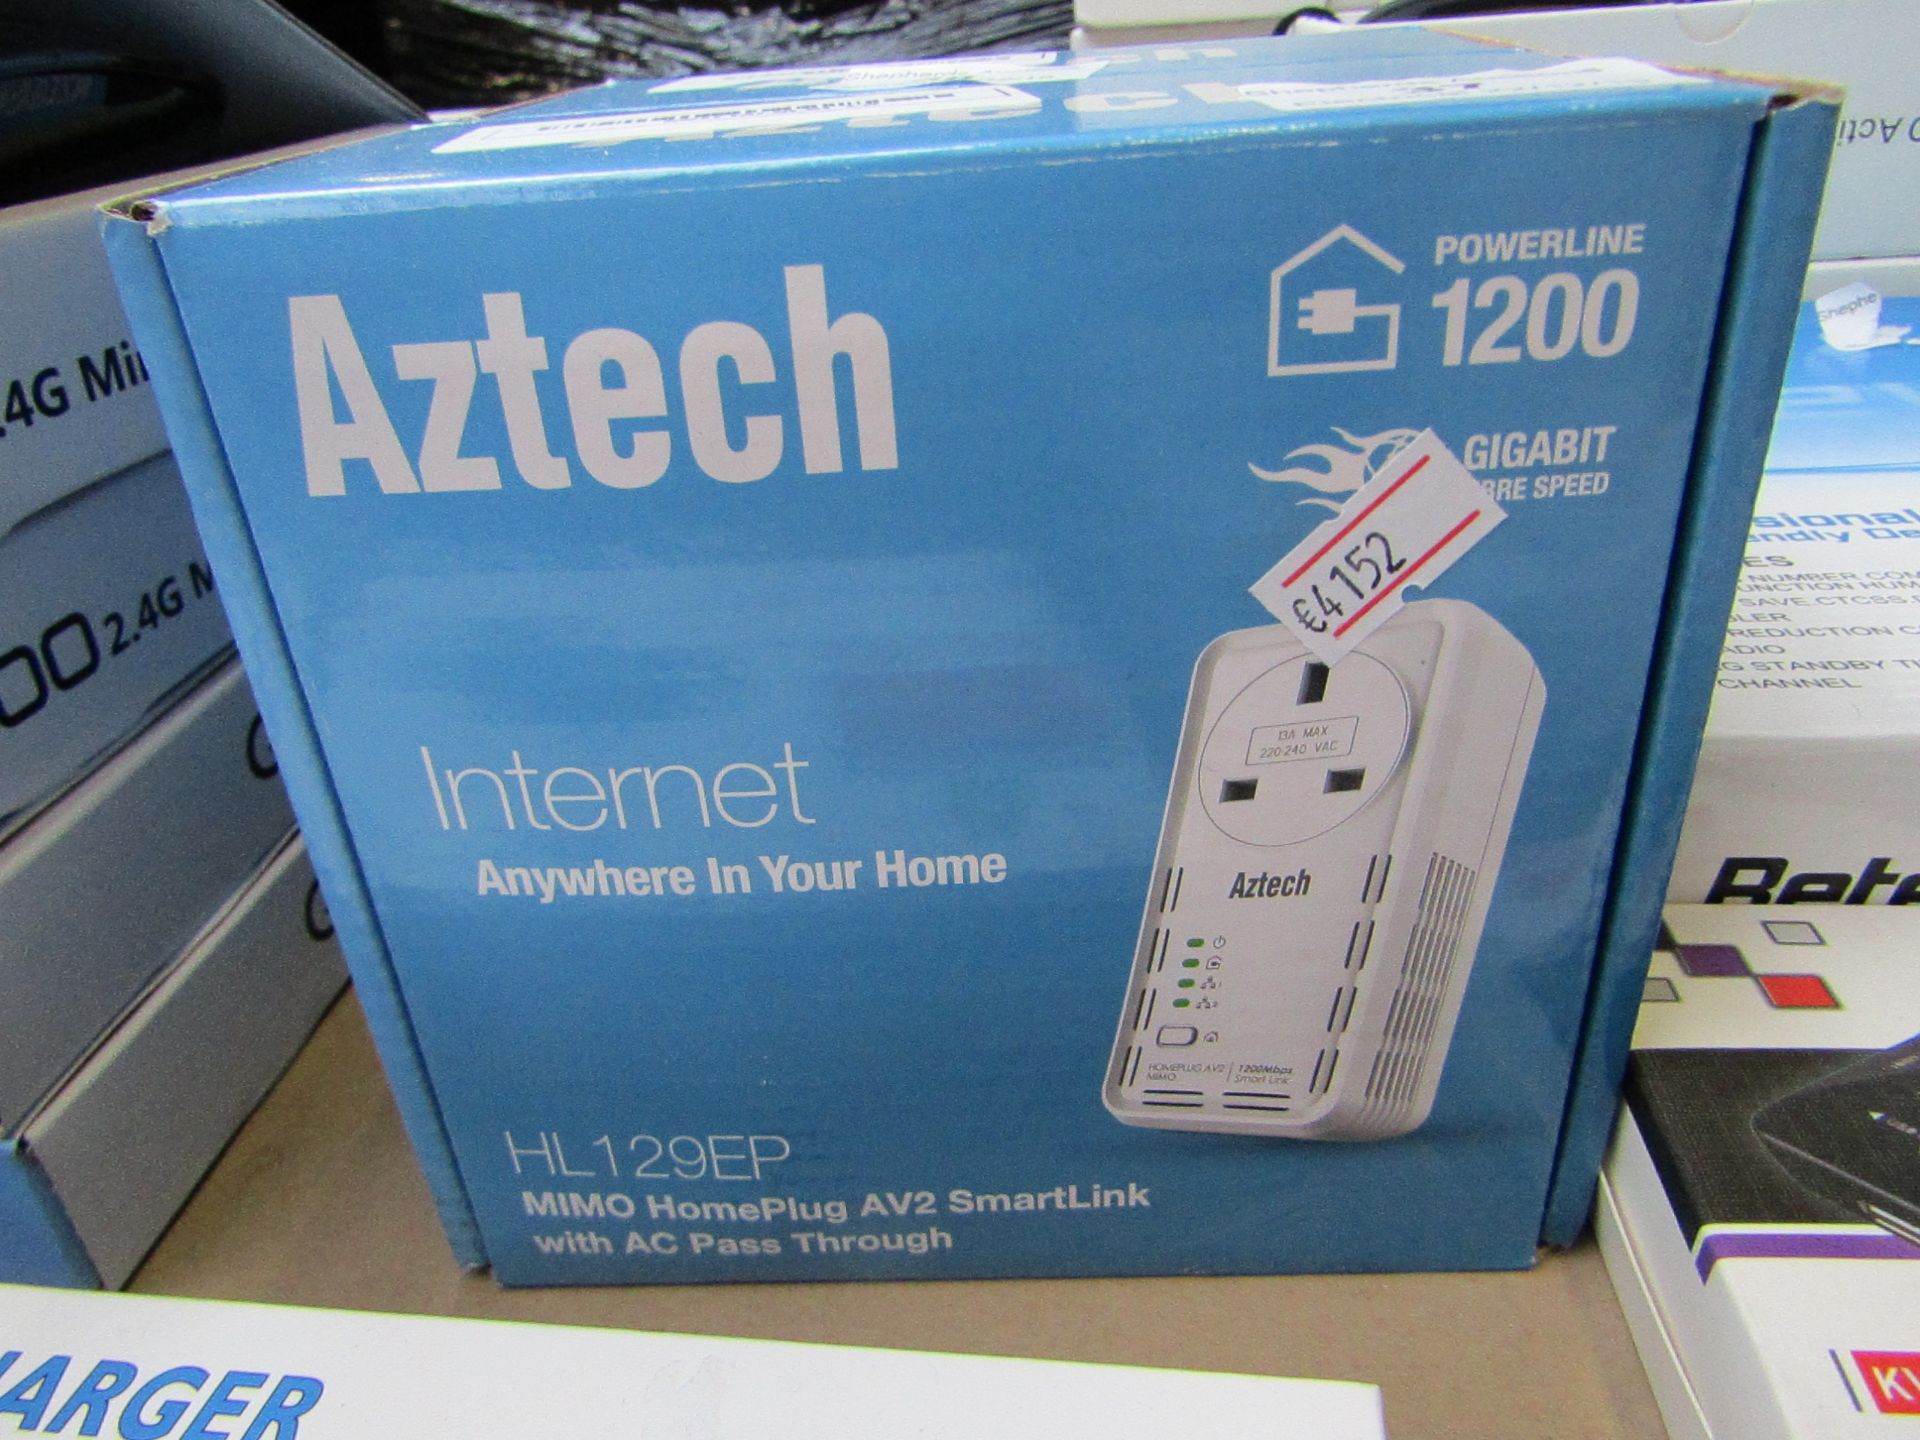 Aztech - HL129EP - MIMO Homeplug AV2 Smartlink with AC paa through, unchecked and boxed.